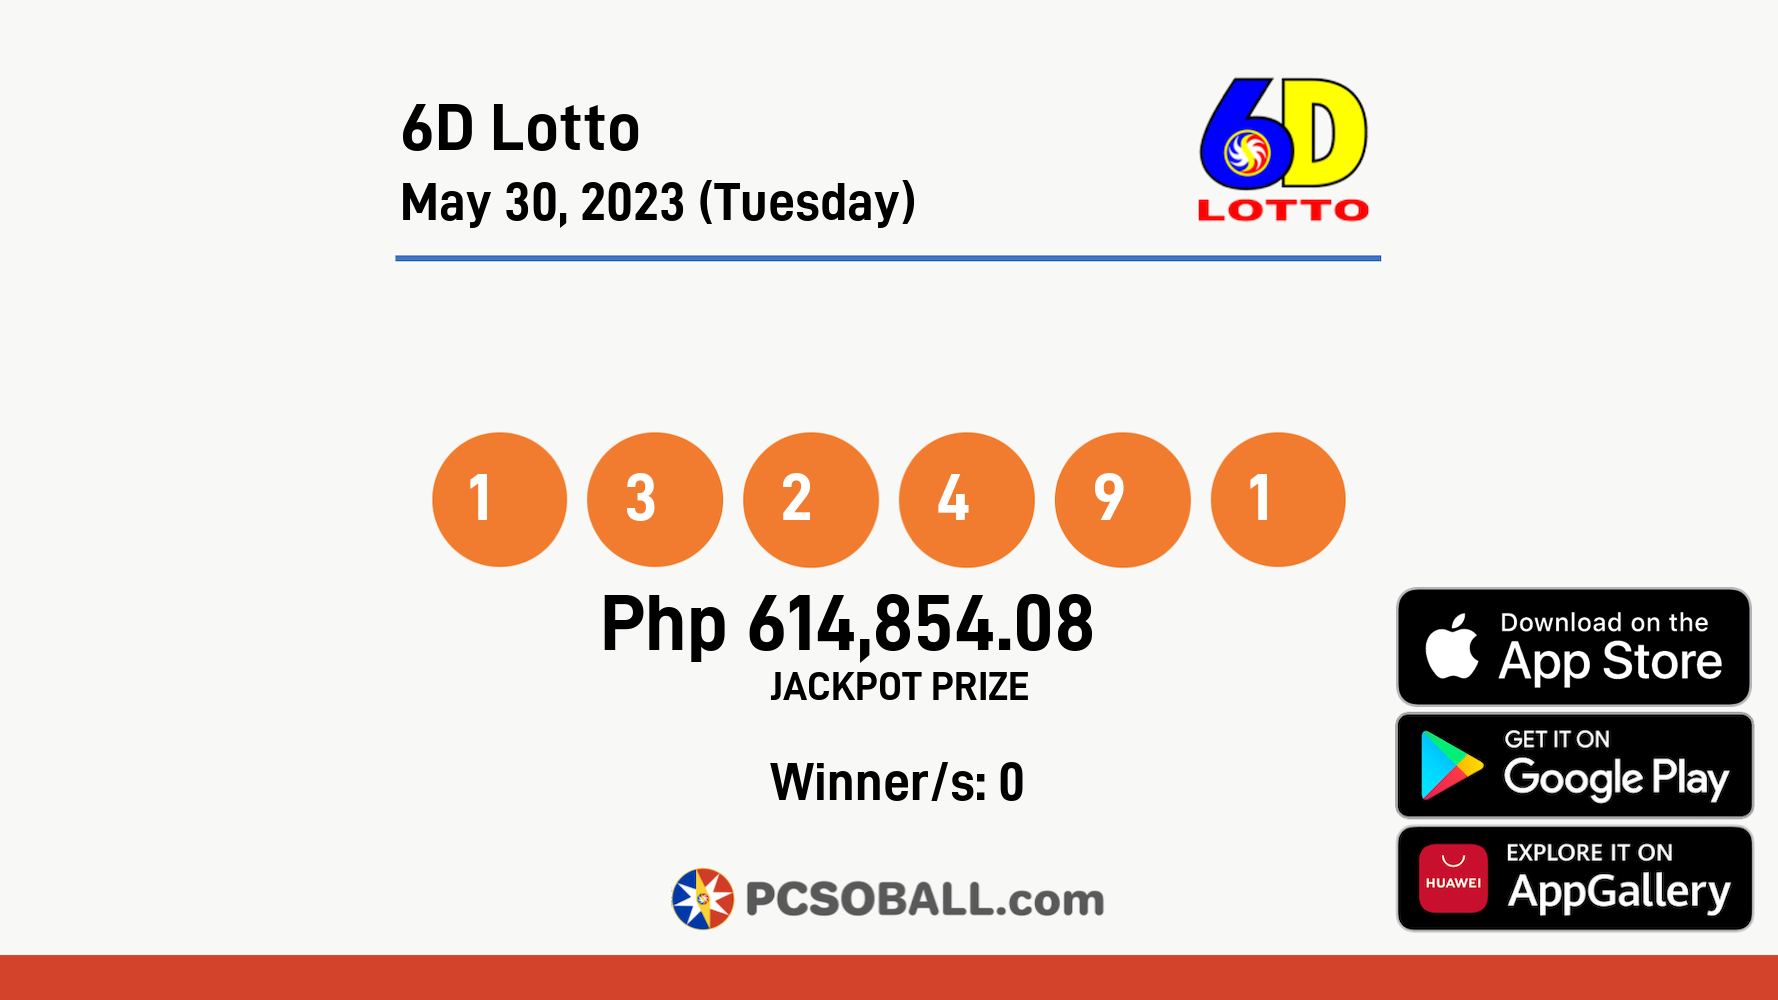 6D Lotto May 30, 2023 (Tuesday) Result